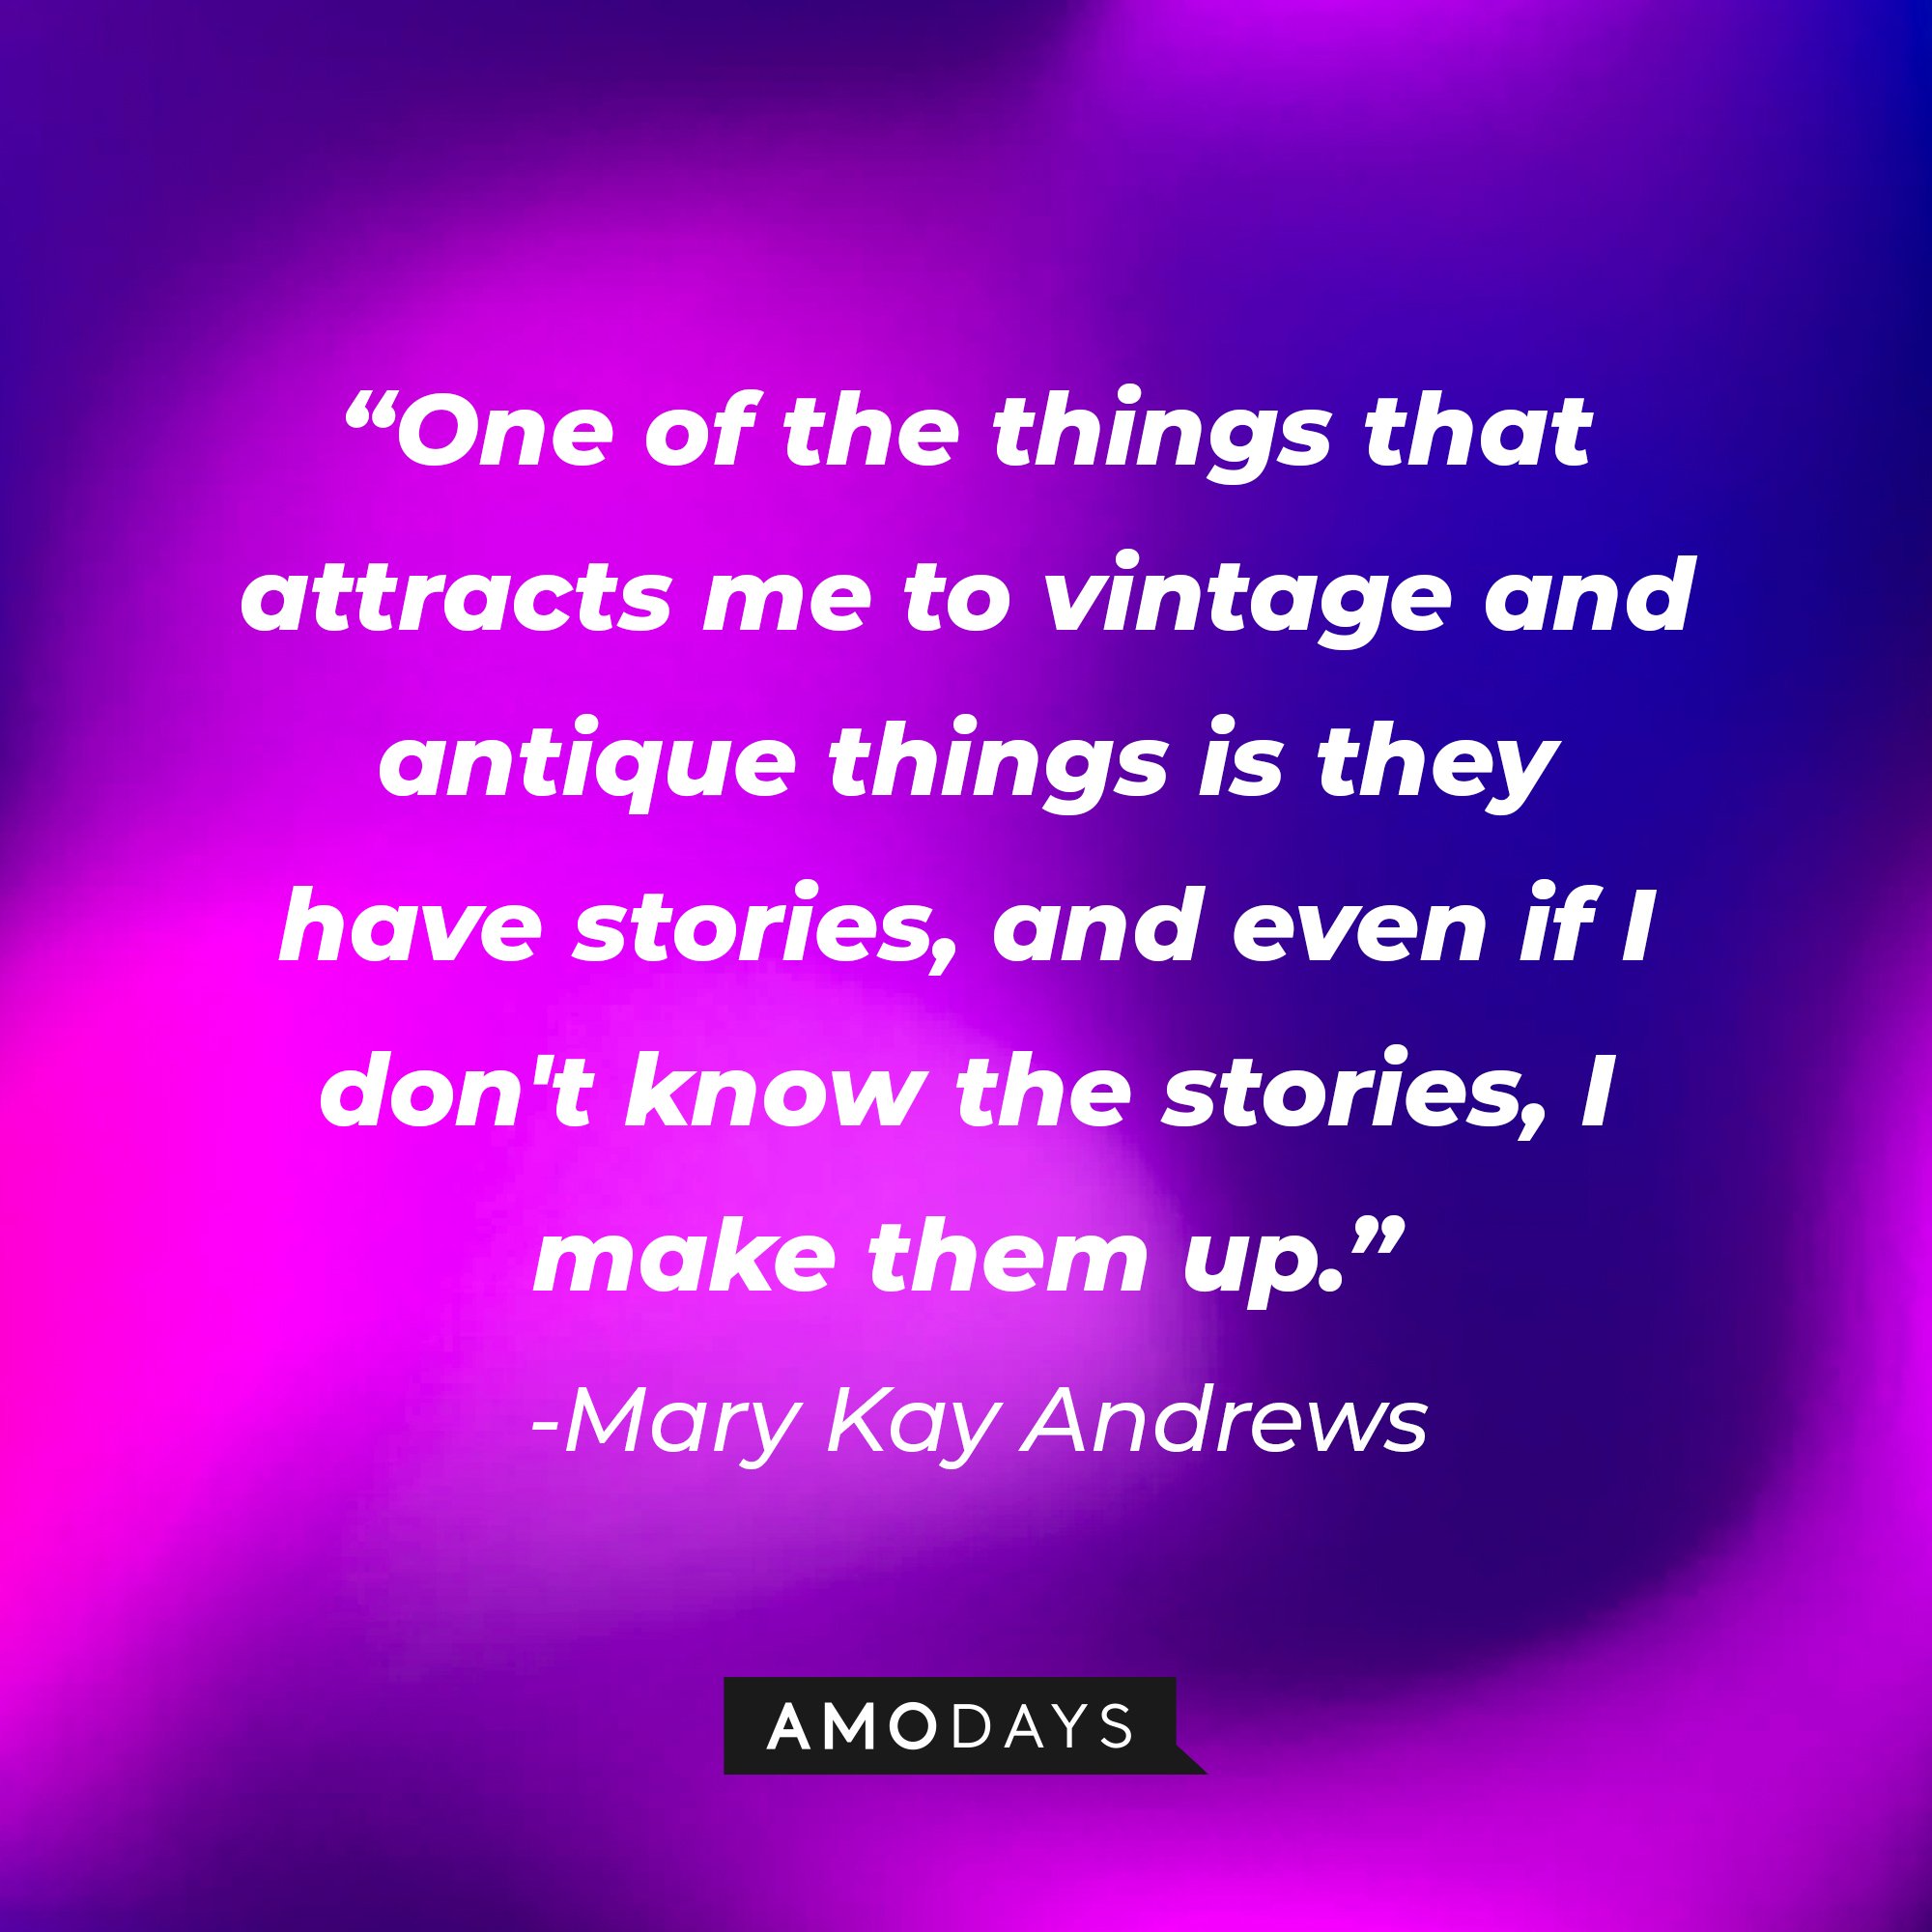  Mary Kay Andrews’s quote: "One of the things that attracts me to vintage and antique things is they have stories, and even if I don't know the stories, I make them up." | Image: AmoDays